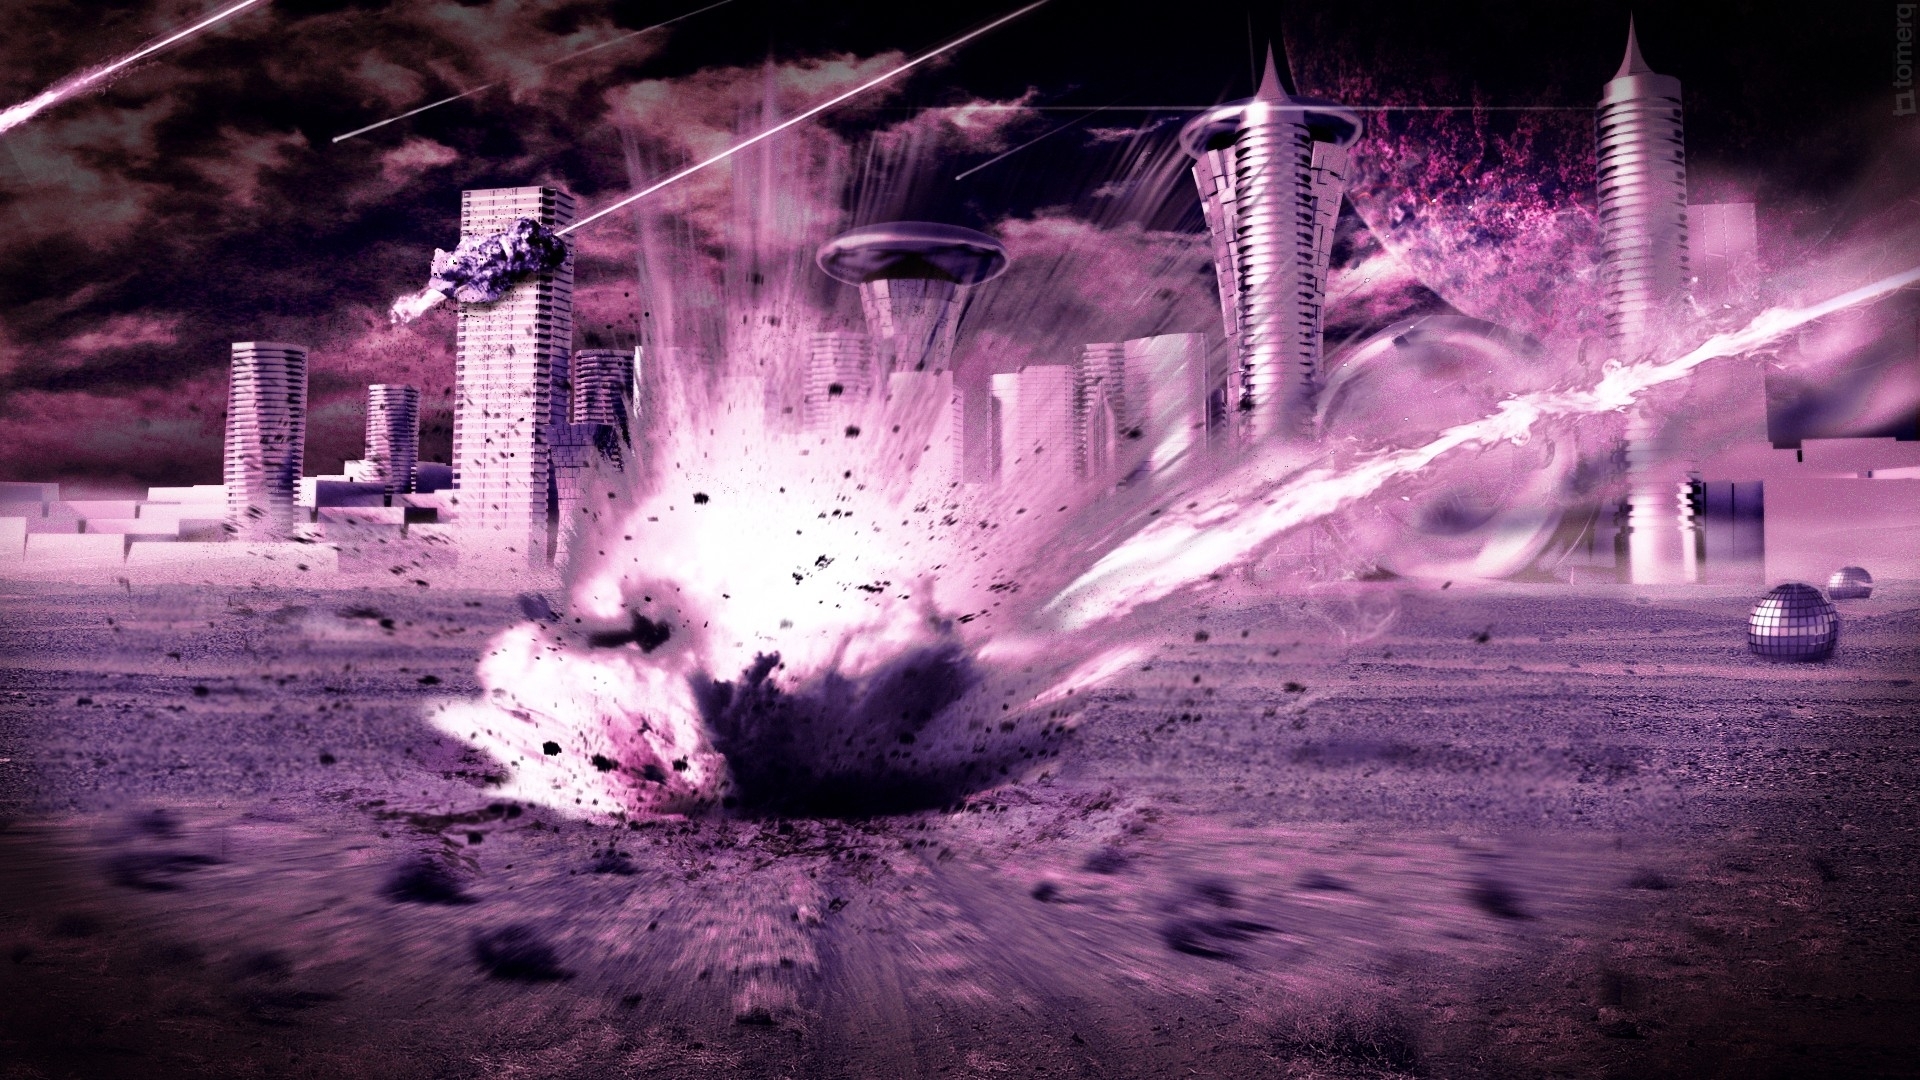 outer, Space, Futuristic, Explosions, Purple, Impact, Meteorite, Cities, Meteor, Apocalyptic, Explosion Wallpaper